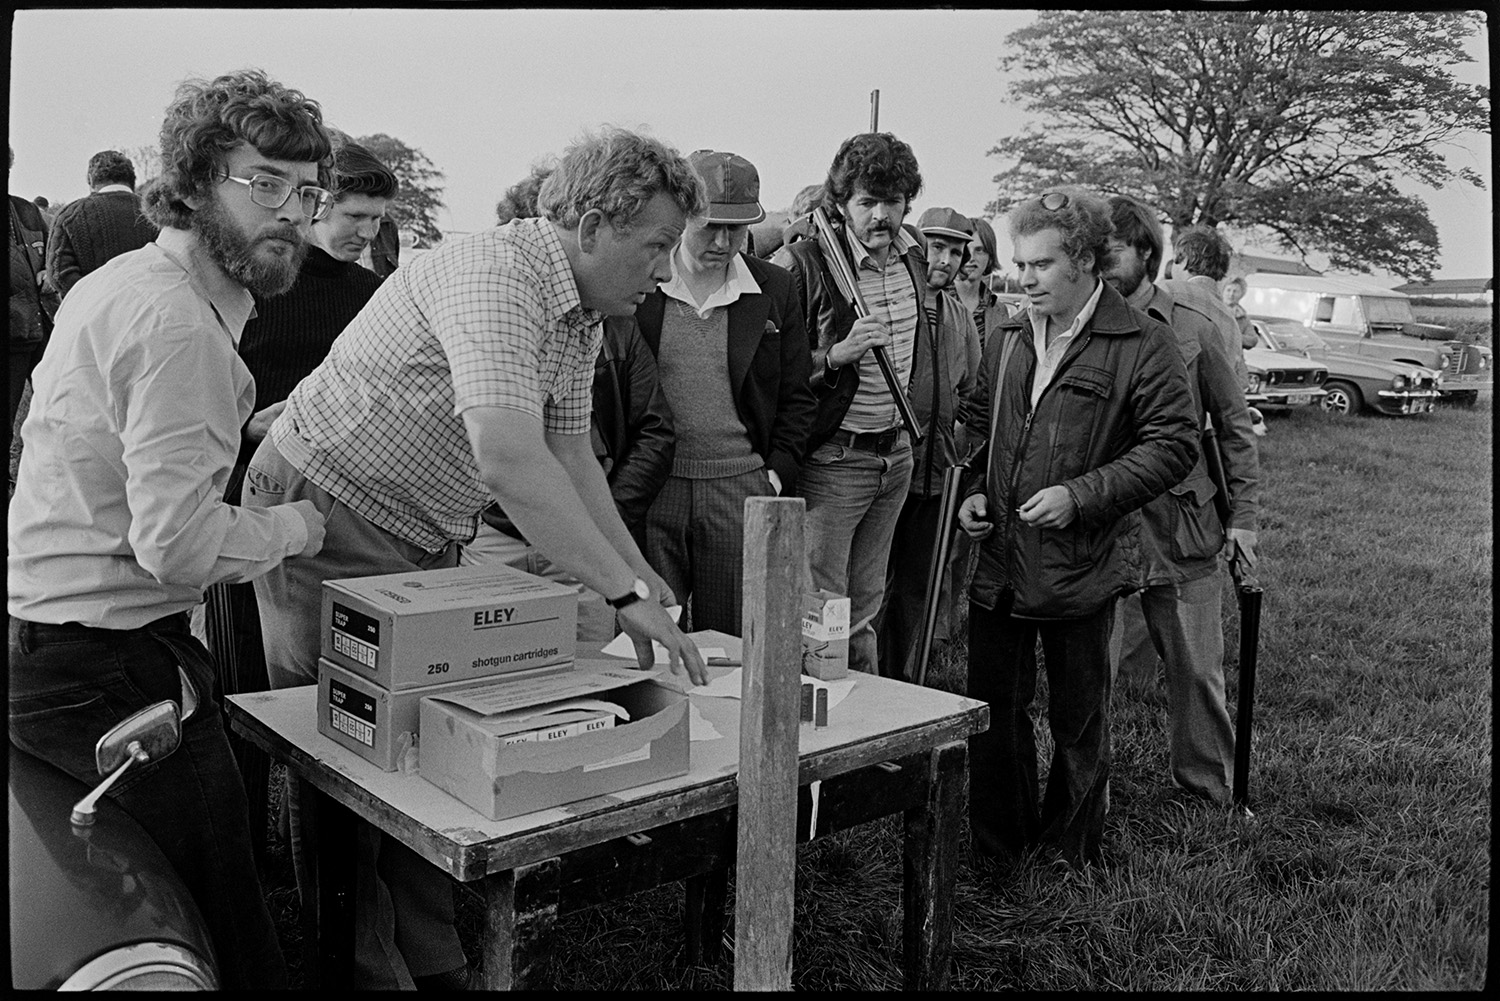 Clay pigeon shoot and games roulette for champagne. 
[Men collecting shotgun cartridges at a clay pigeon shoot at Harepath, Beaford. Parked cars can be seen in the background.]